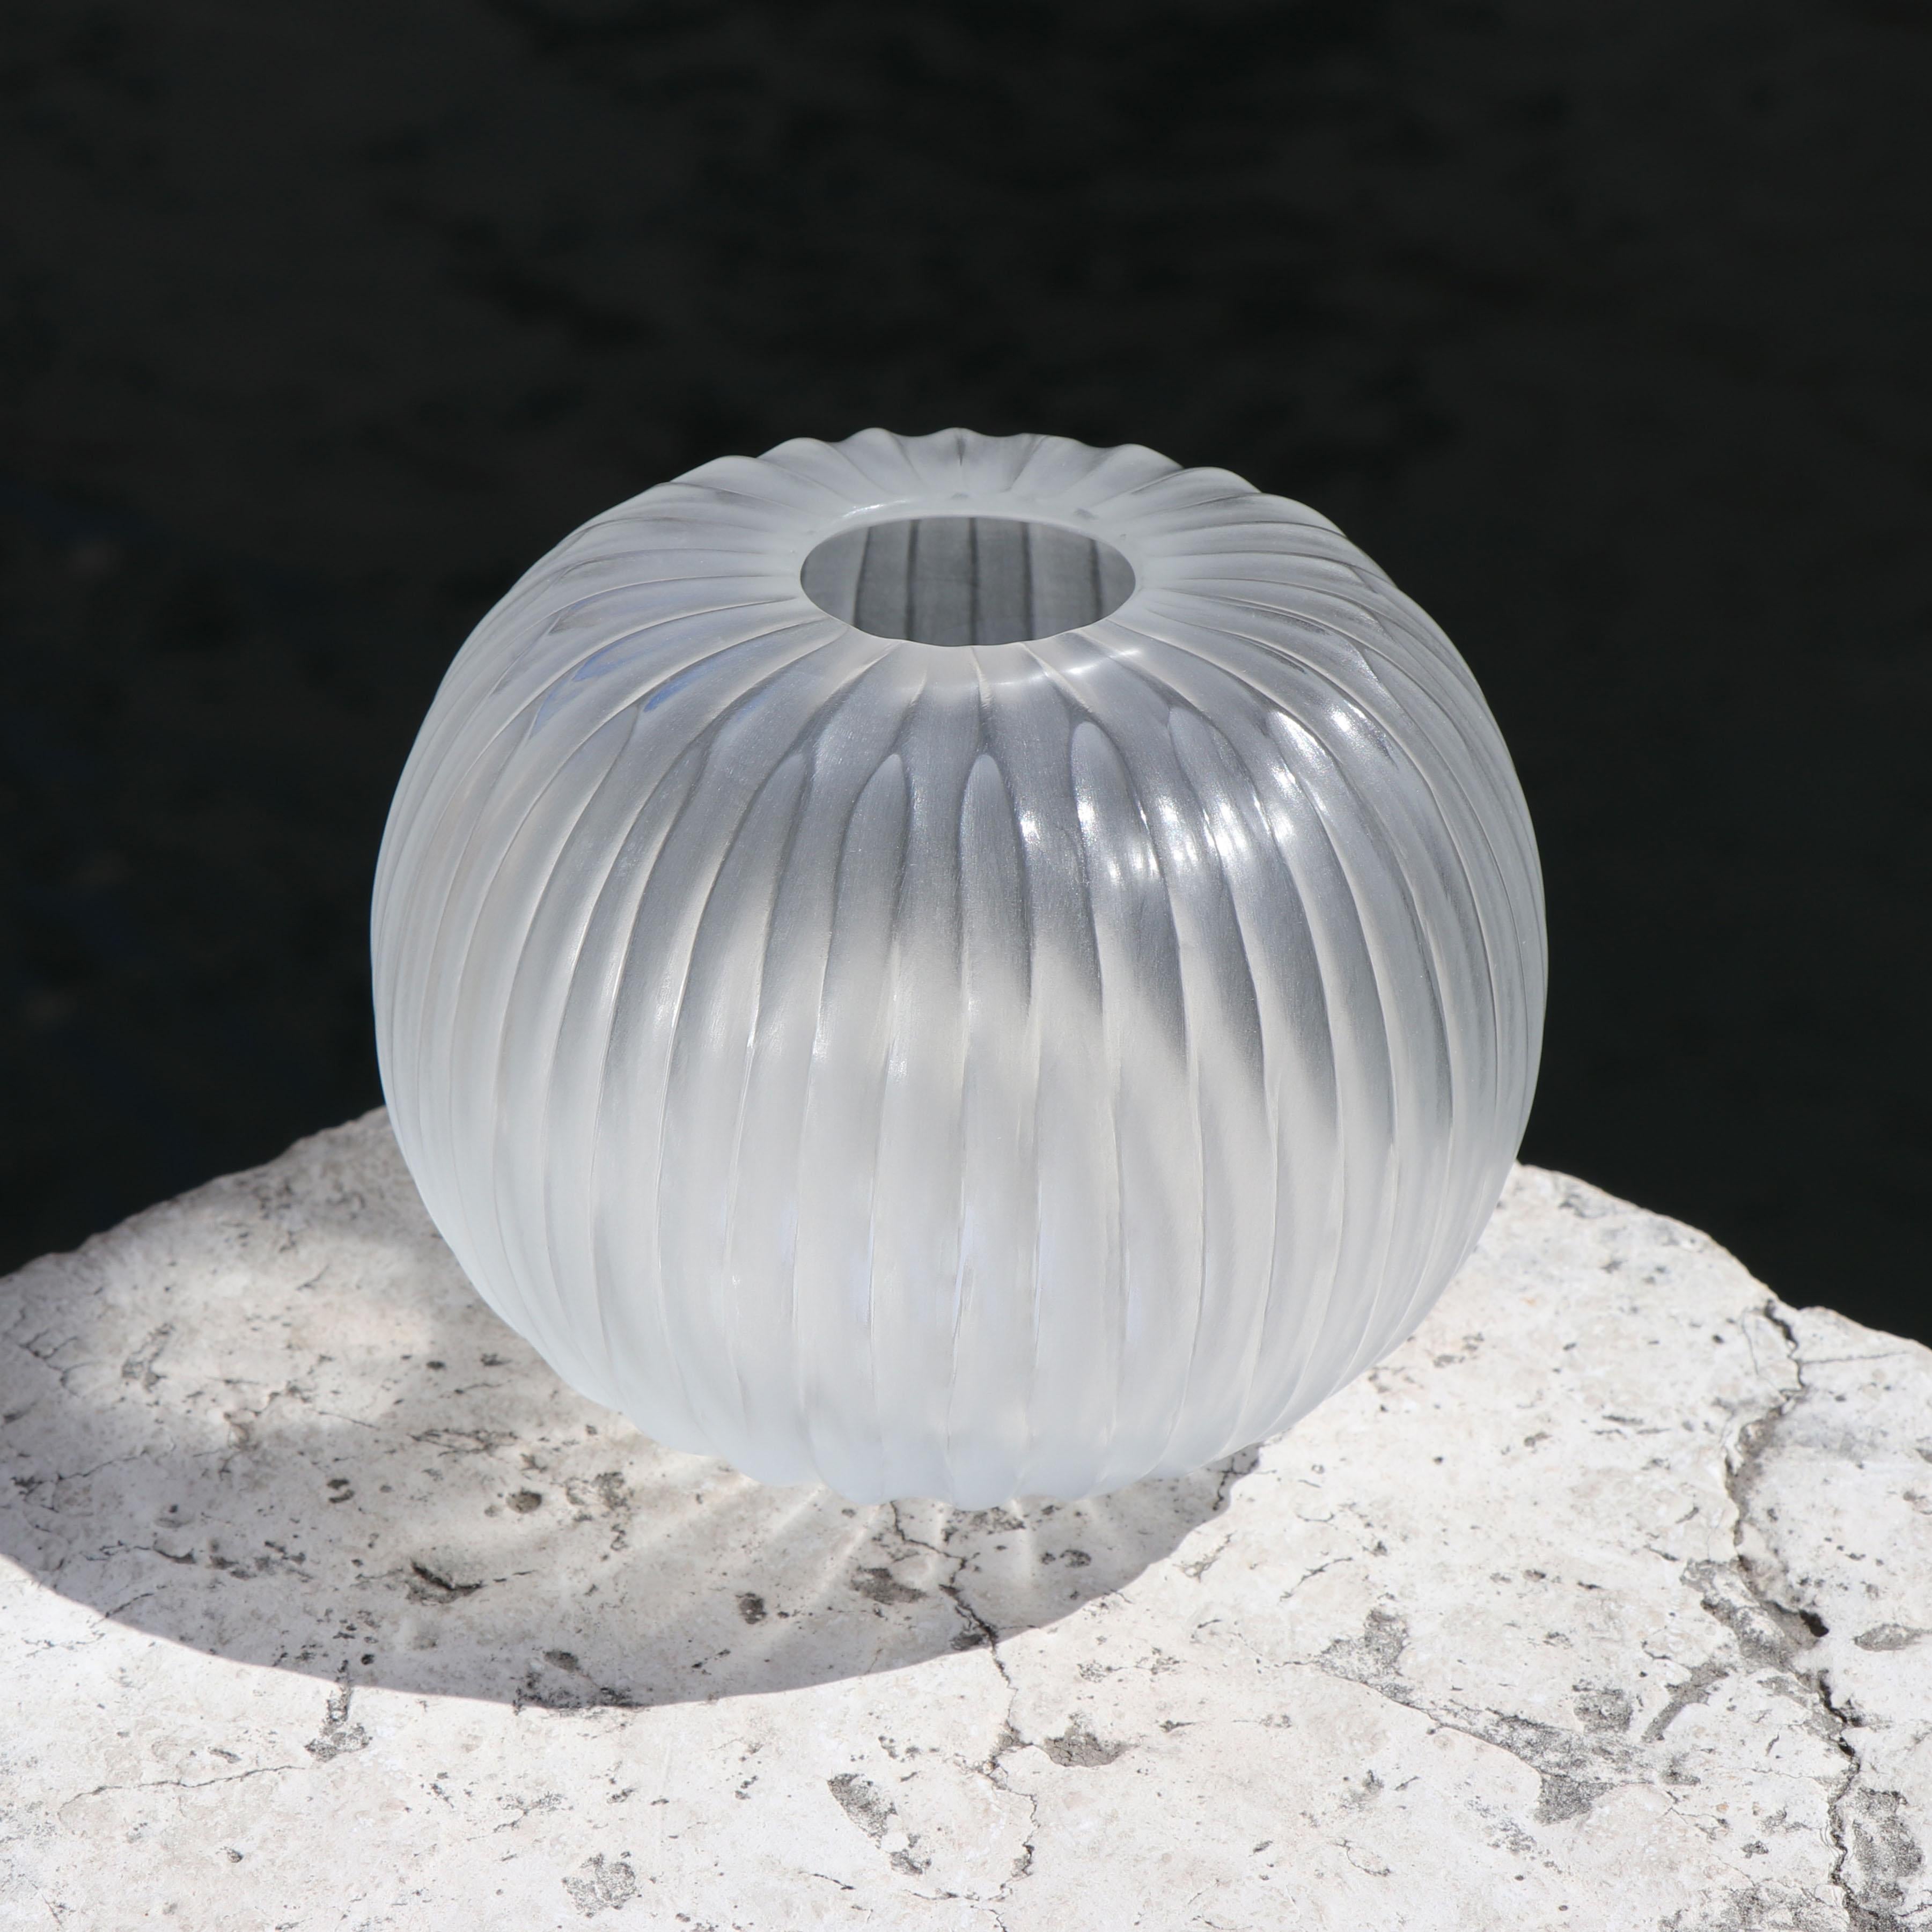 The melted glass is first blown in the heat of the furnace and shaped into a round vase with a small opening. Once solid the glass is cold carved to produce the linear cuts which mark its surface reminding us of the shell of a sea urchin, Riccio.